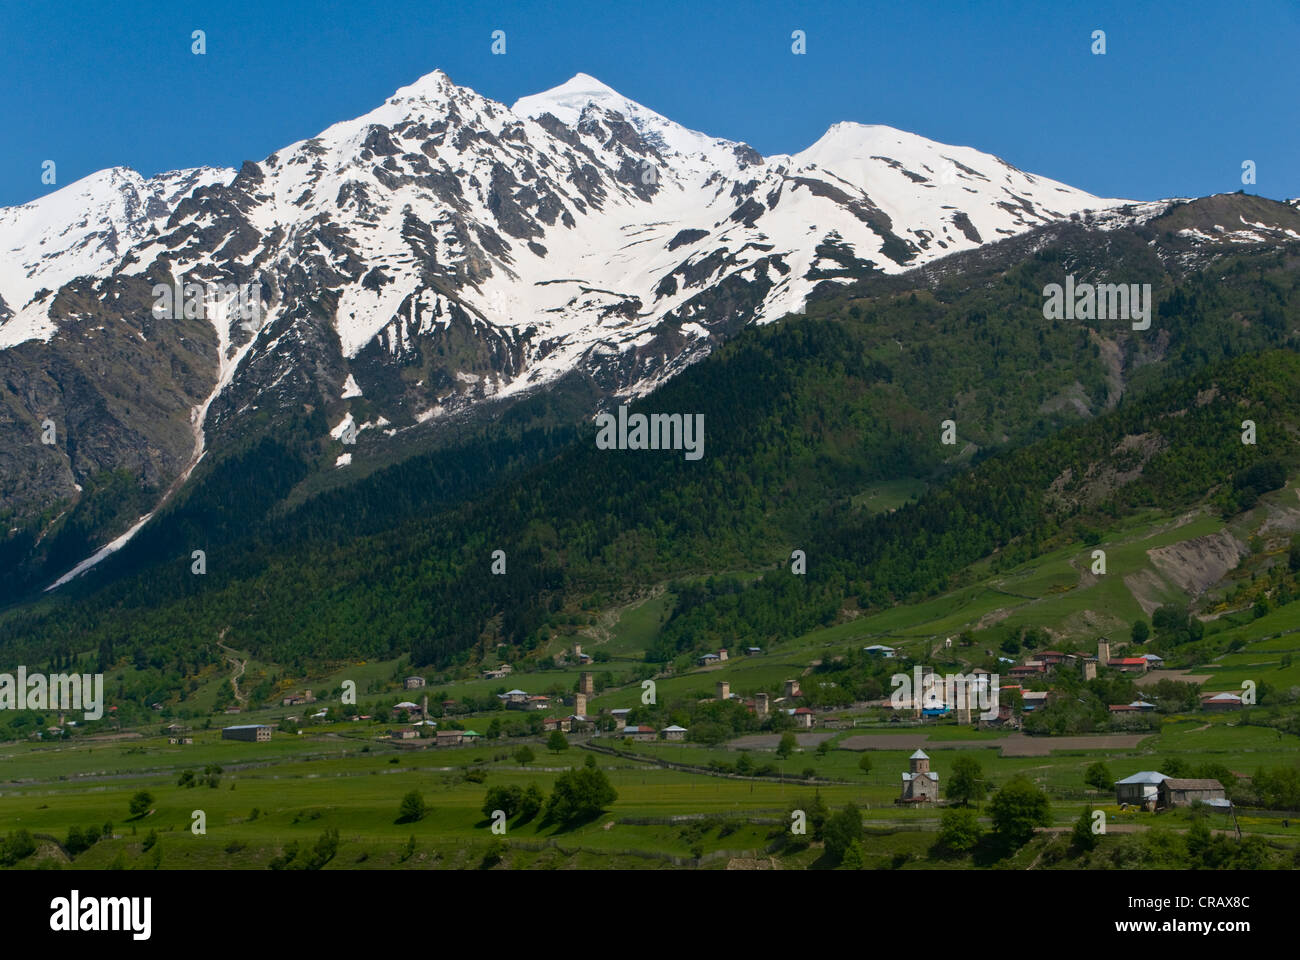 Alpine scenery with mountains and green valleys, Svaneti province, Georgia, Middle East Stock Photo